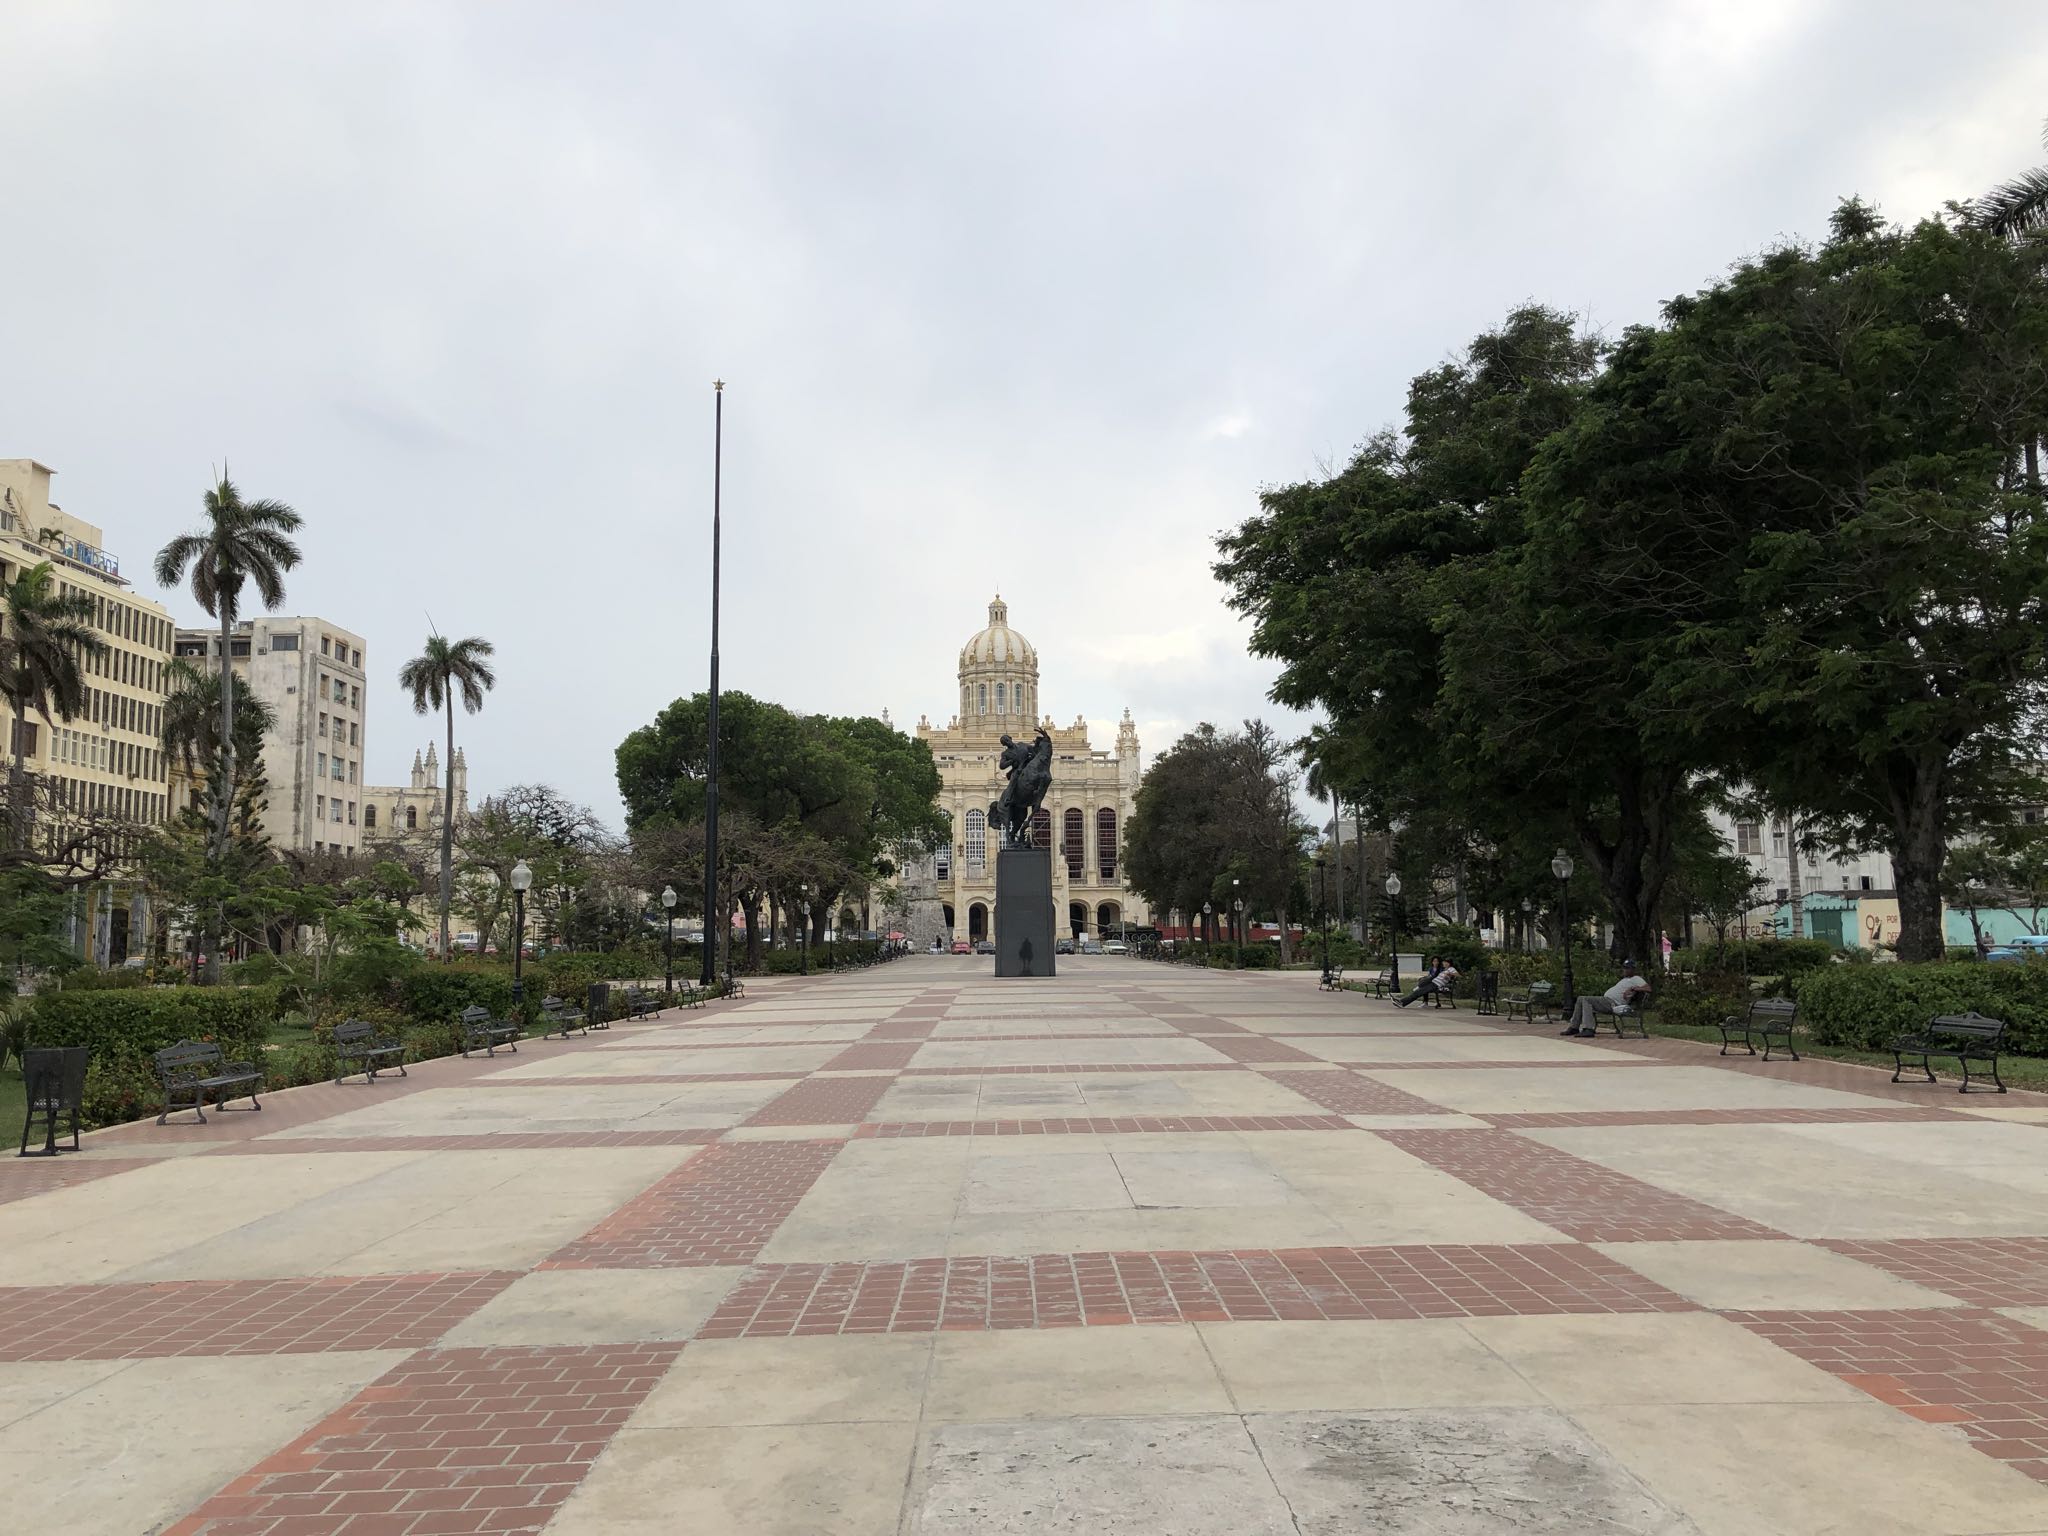 Photo 86 of 221 from the album Highlights Cuba 2019.